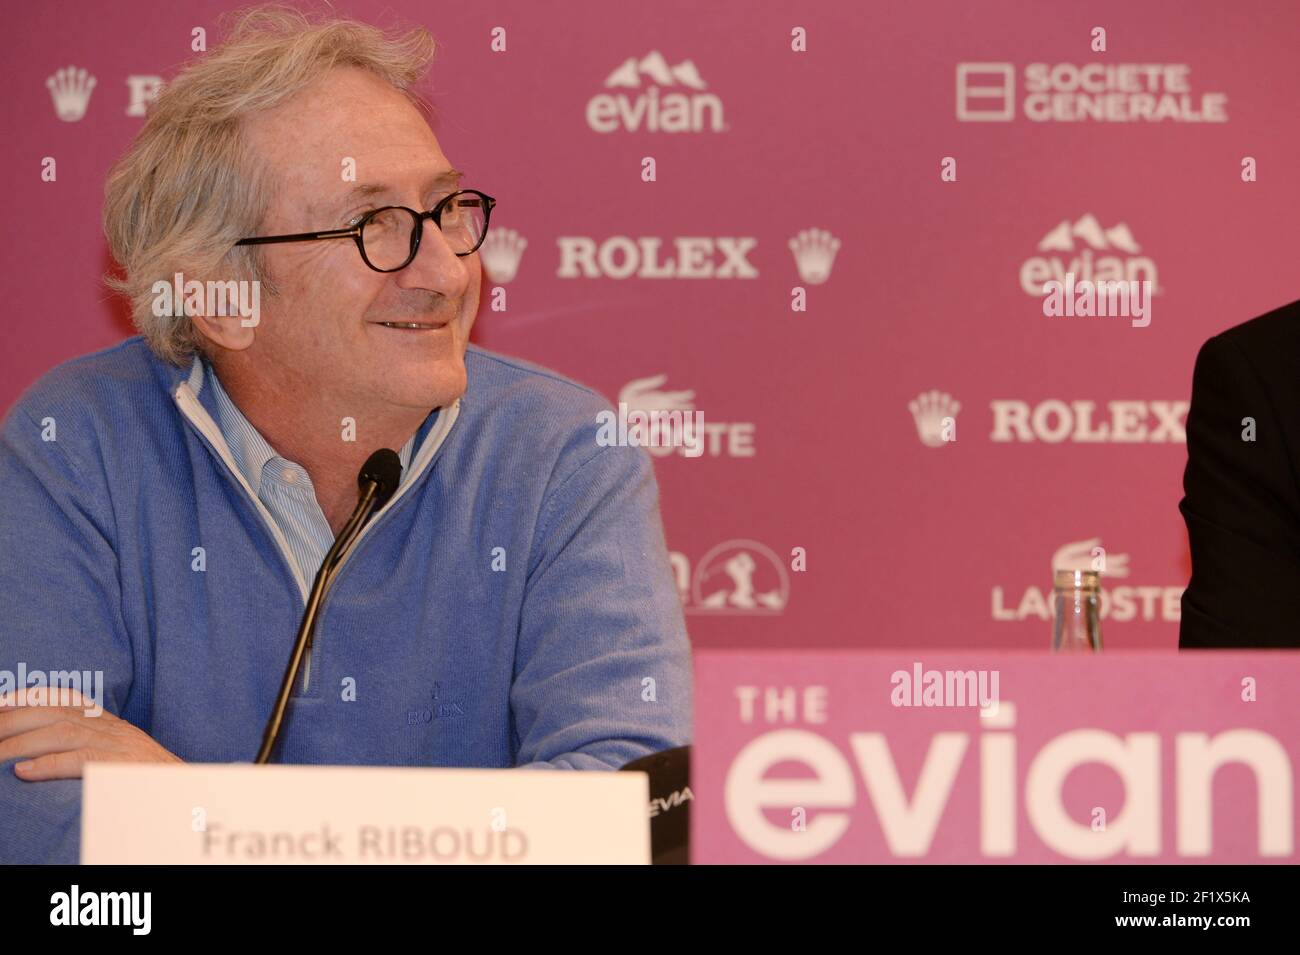 GOLF - THE EVIAN CHAMPIONSHIP 2013 - EVIAN (FRA) - 28/06/2013 - INAUGURATION NEW COURSE - PHOTO PHILIPPE MILLEREAU / KMSP / DPPI - FRANCK RIBOUD / CEO DANONE Stock Photo